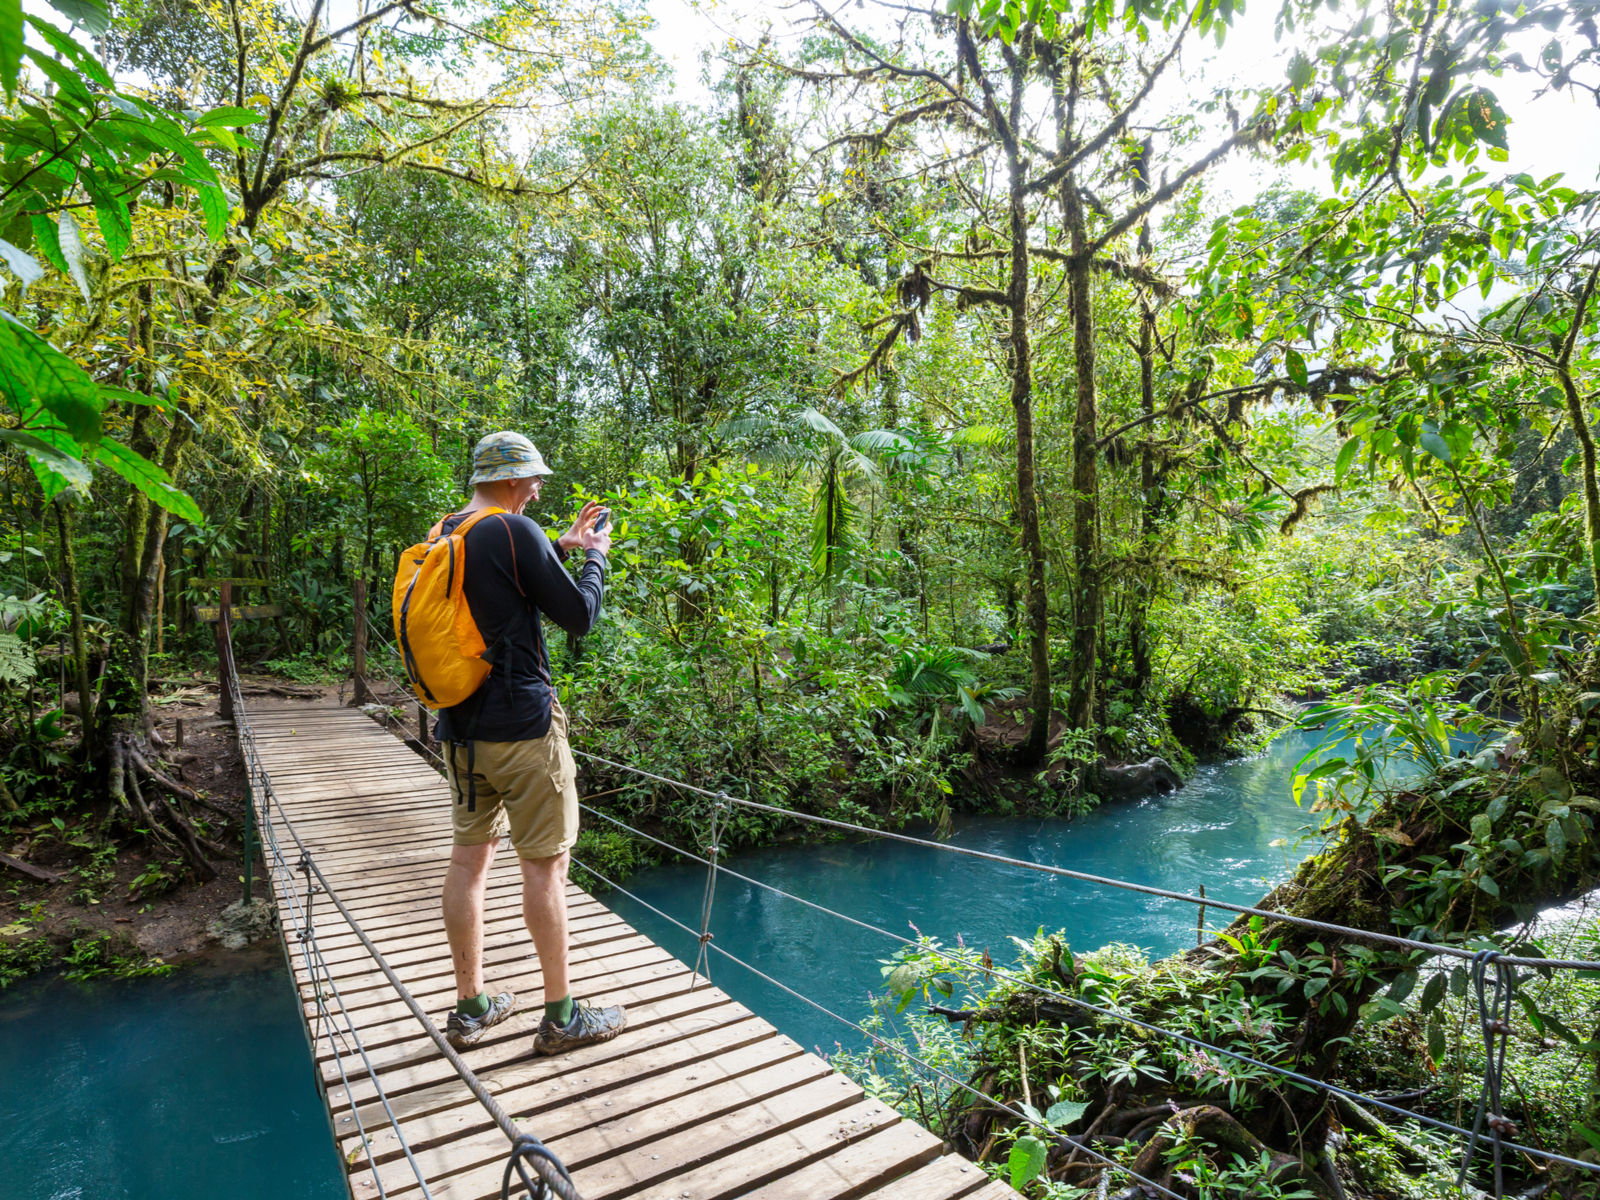 Guy hiking in the tropical green jungle with teal water below him in La Fortuna, one of our picks for where to stay in Costa Rica